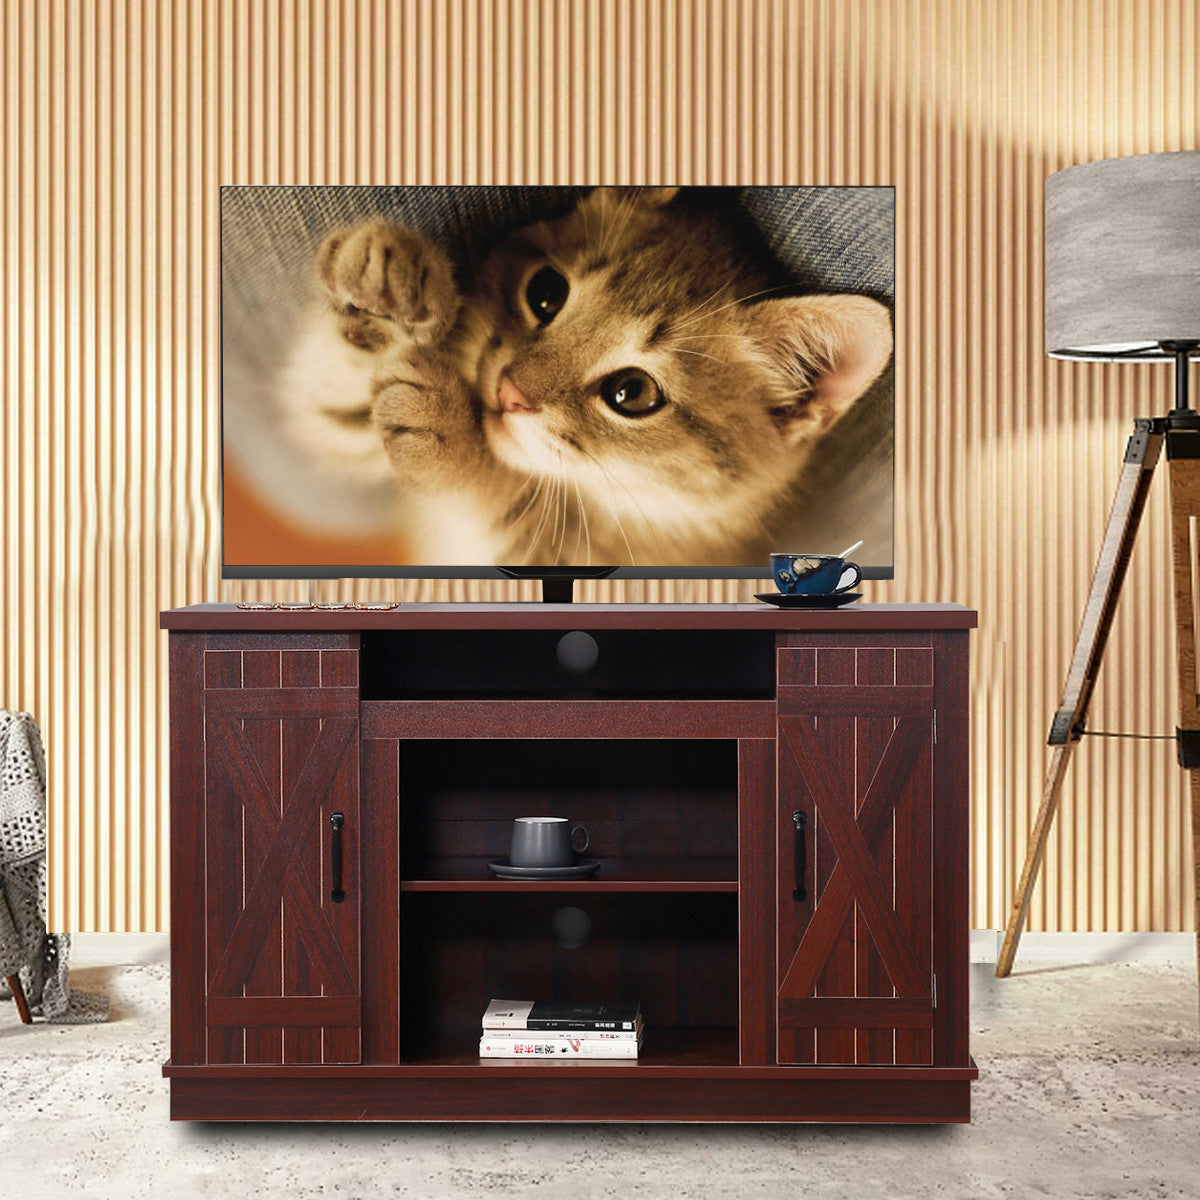 Woodyhome™ TV Stand  Cabinet MDF Wooden Unit Console with Large Storage Shelf Door